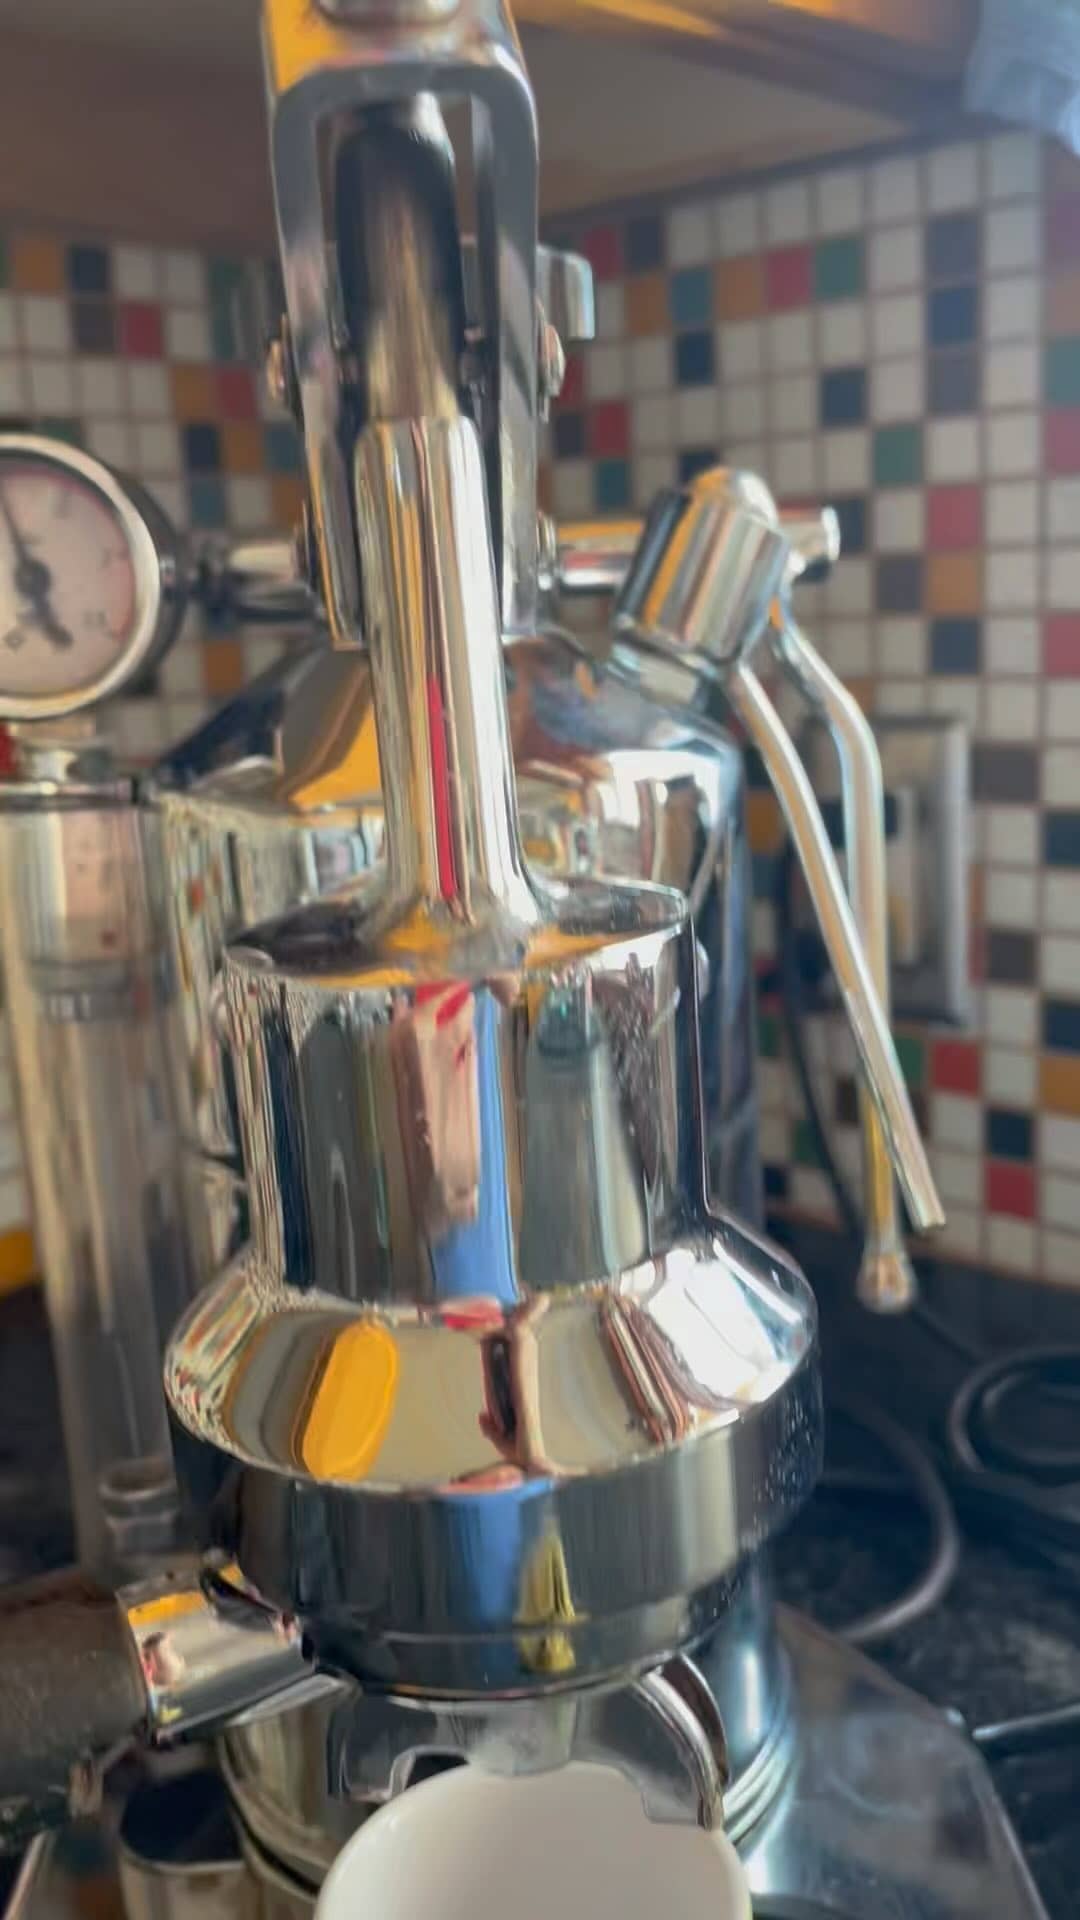 Morning coffee hits differently when you have a beautiful machine to brew the perfect cup!☕️ 
I switch between tea, coffee, and turmeric lattes to get me started. 🌞 hby? 
#pavoni #coffee #stimulant